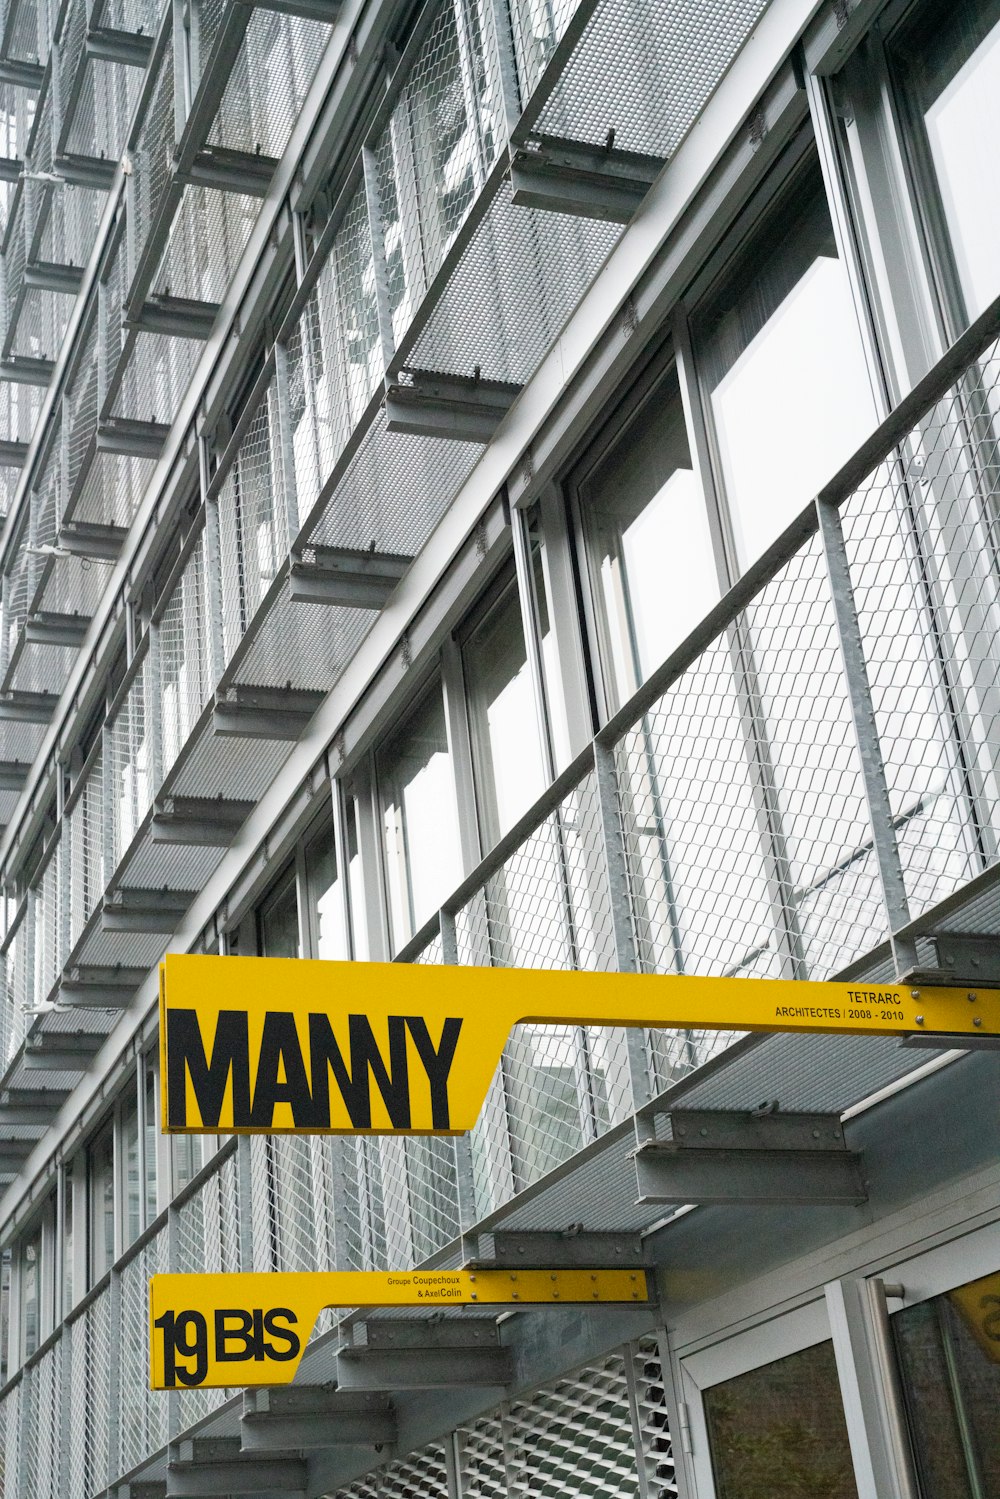 a yellow street sign hanging from the side of a building